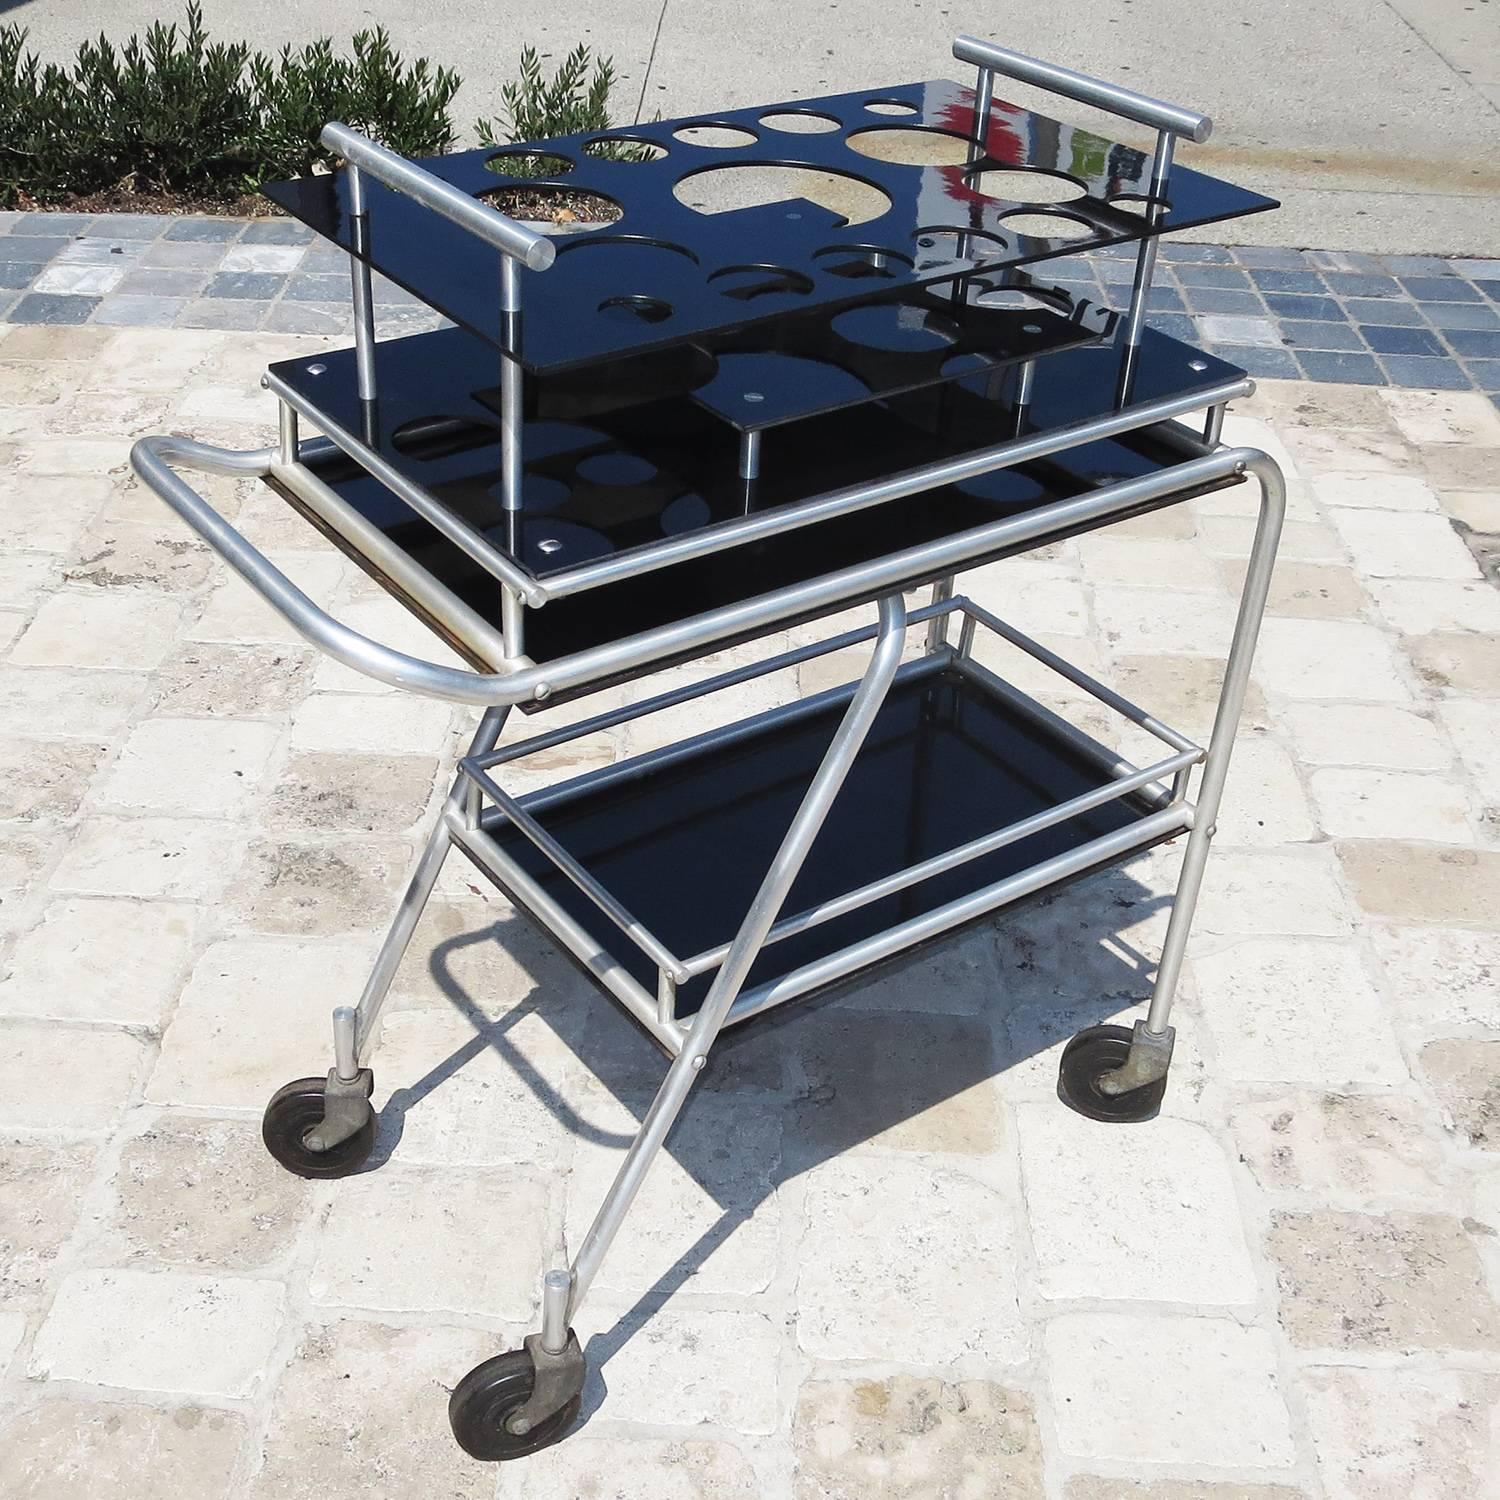 American Deco DC3 Aero Art Cocktail Trolley Cart with Rare Serving Tray